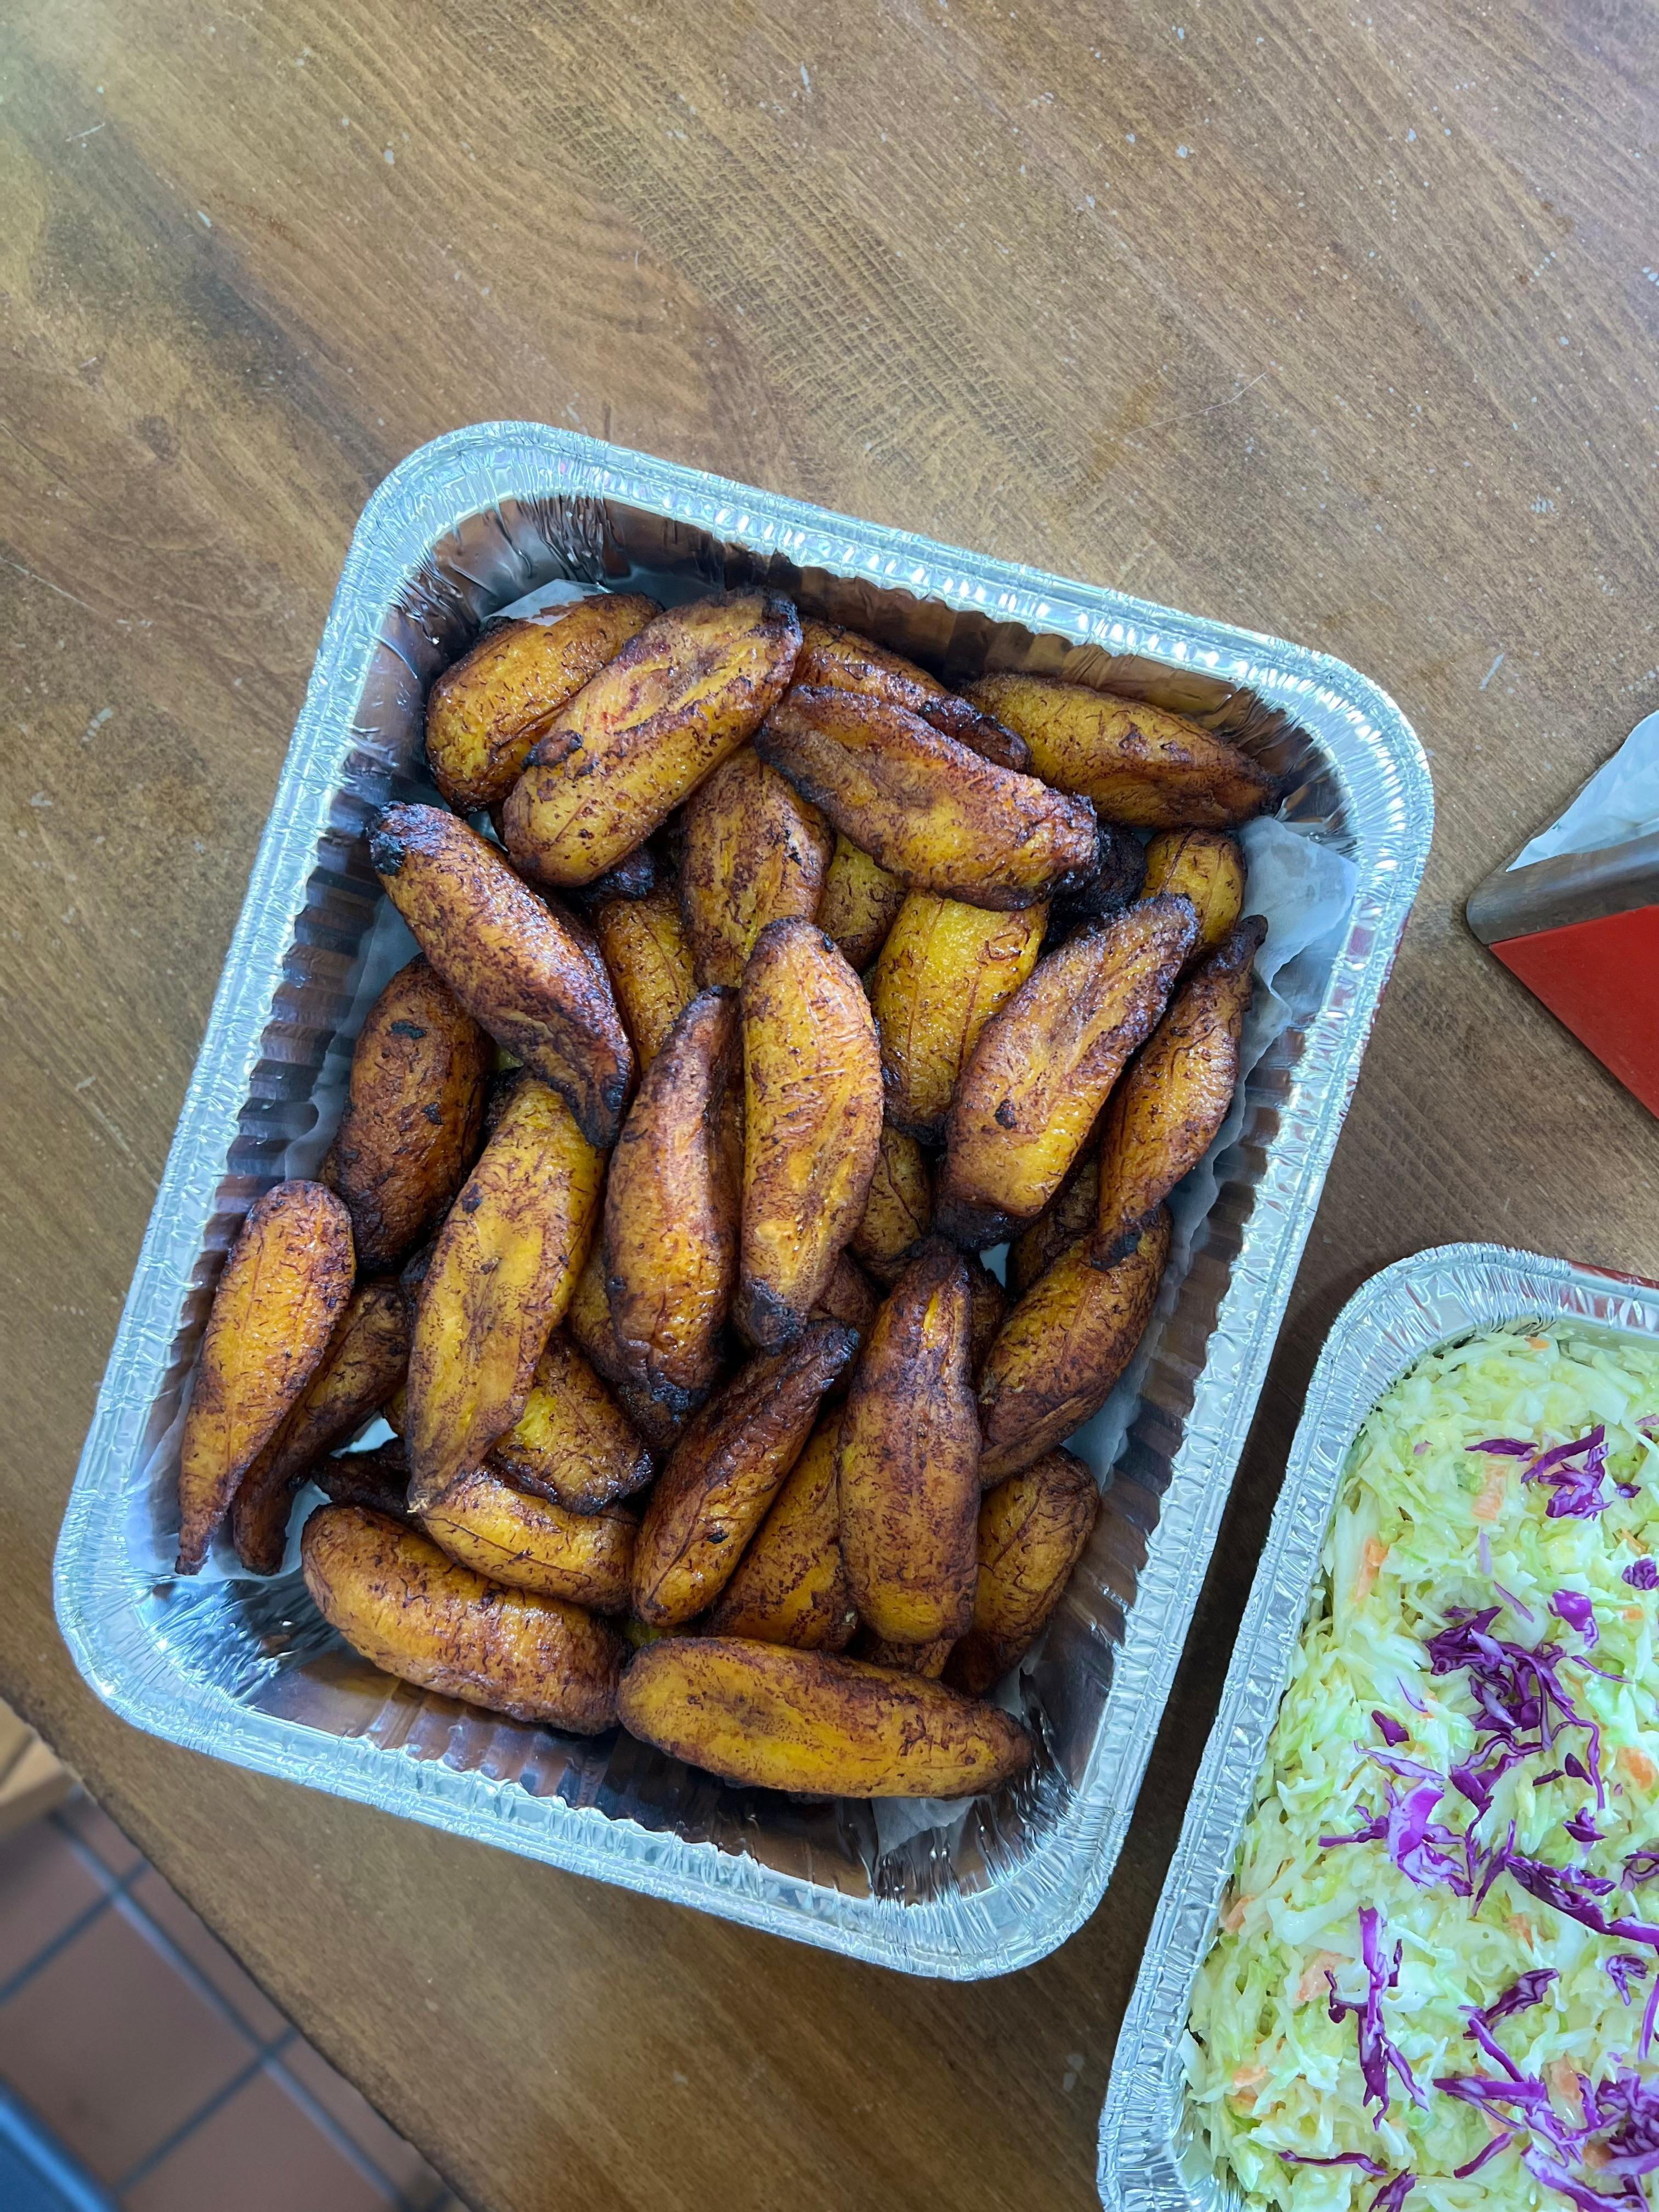 Tray of Fried Plantains